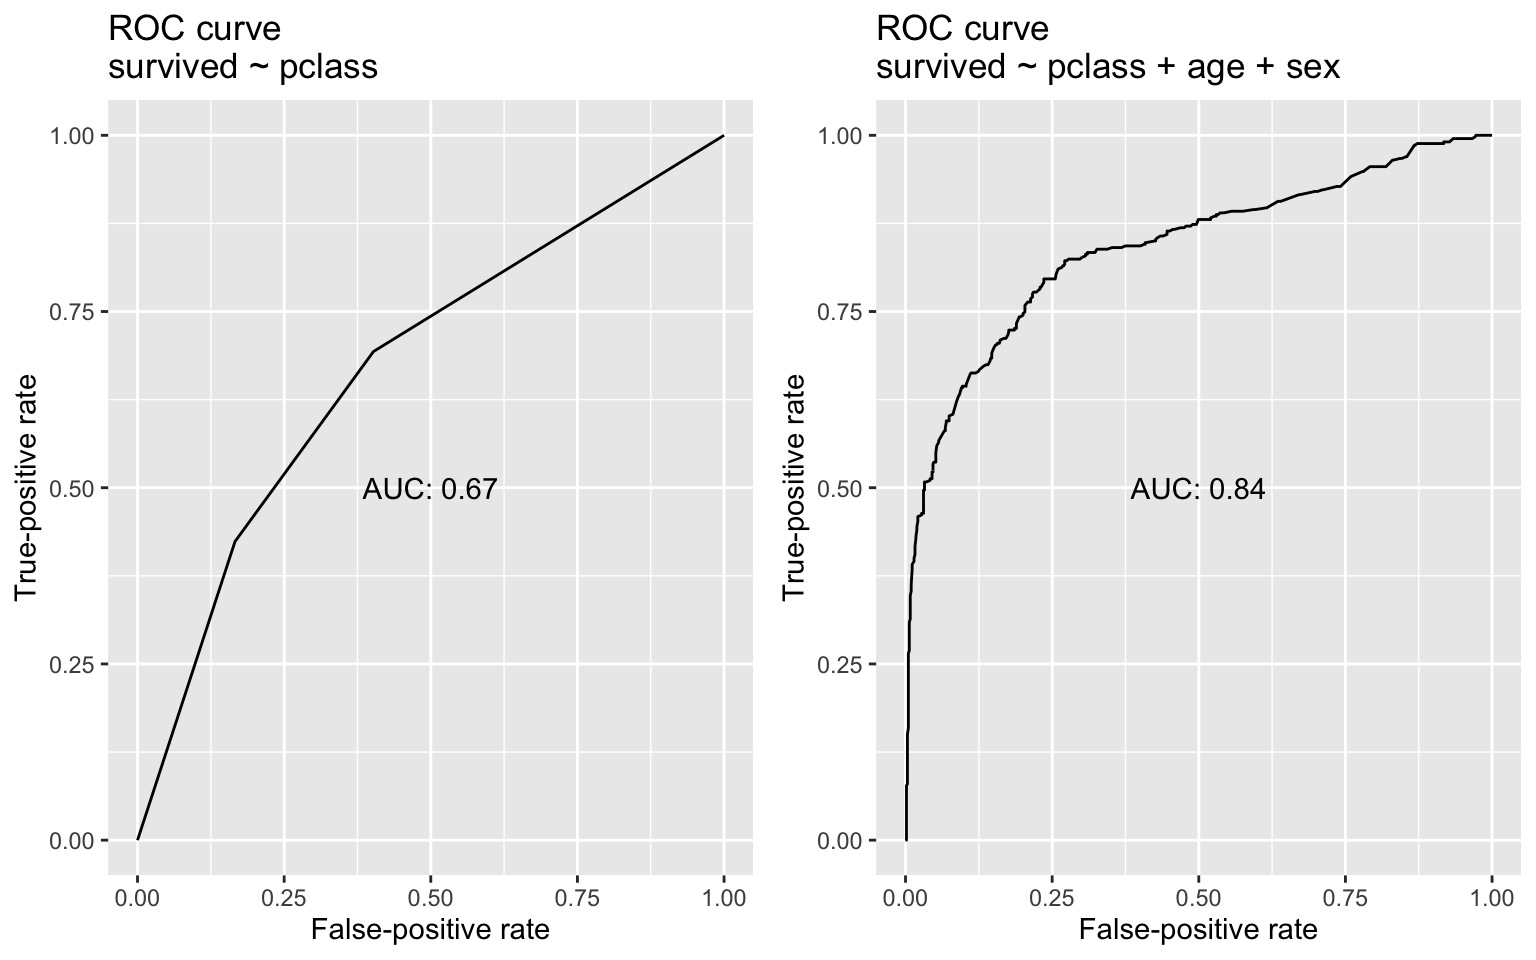 roc curve for model predicting survival from age and roc curve for model predicting survival from age, passenger class, and sex